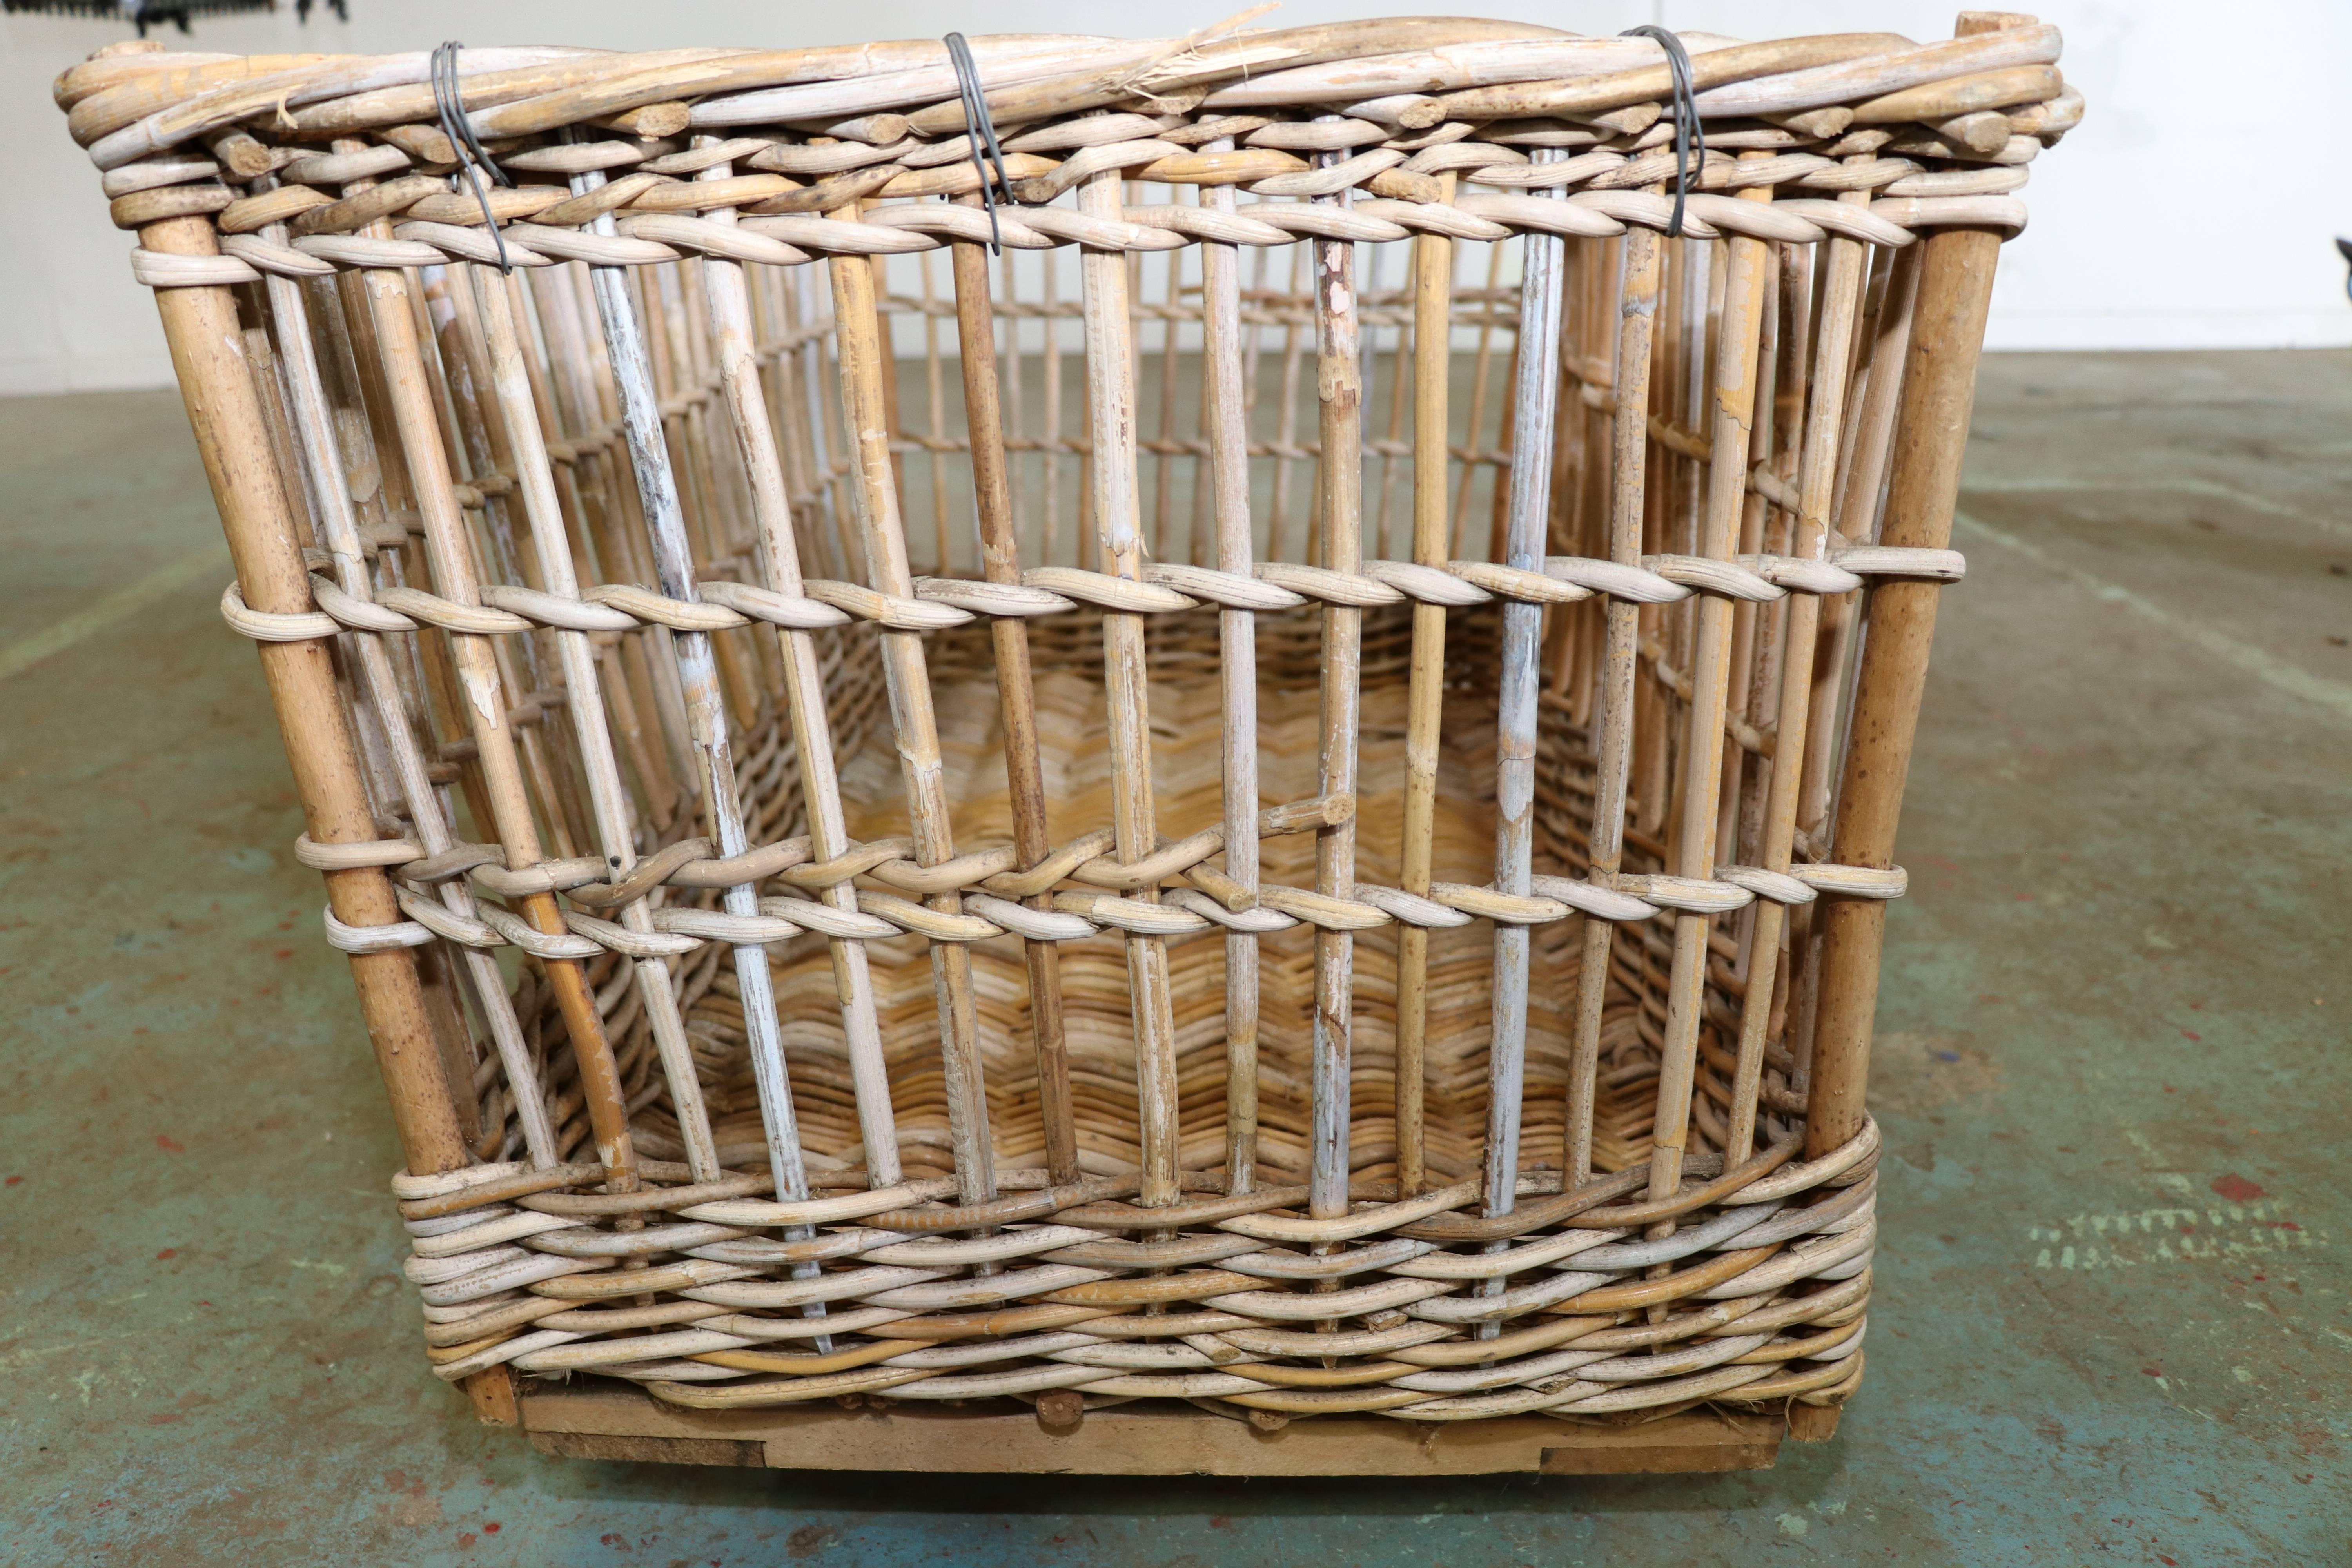 This large-scale wicker cart was used in a Belgian linen factory in the 1920s. The cart is on four wheels. Two carts available, which vary slightly. Price is for one cart.